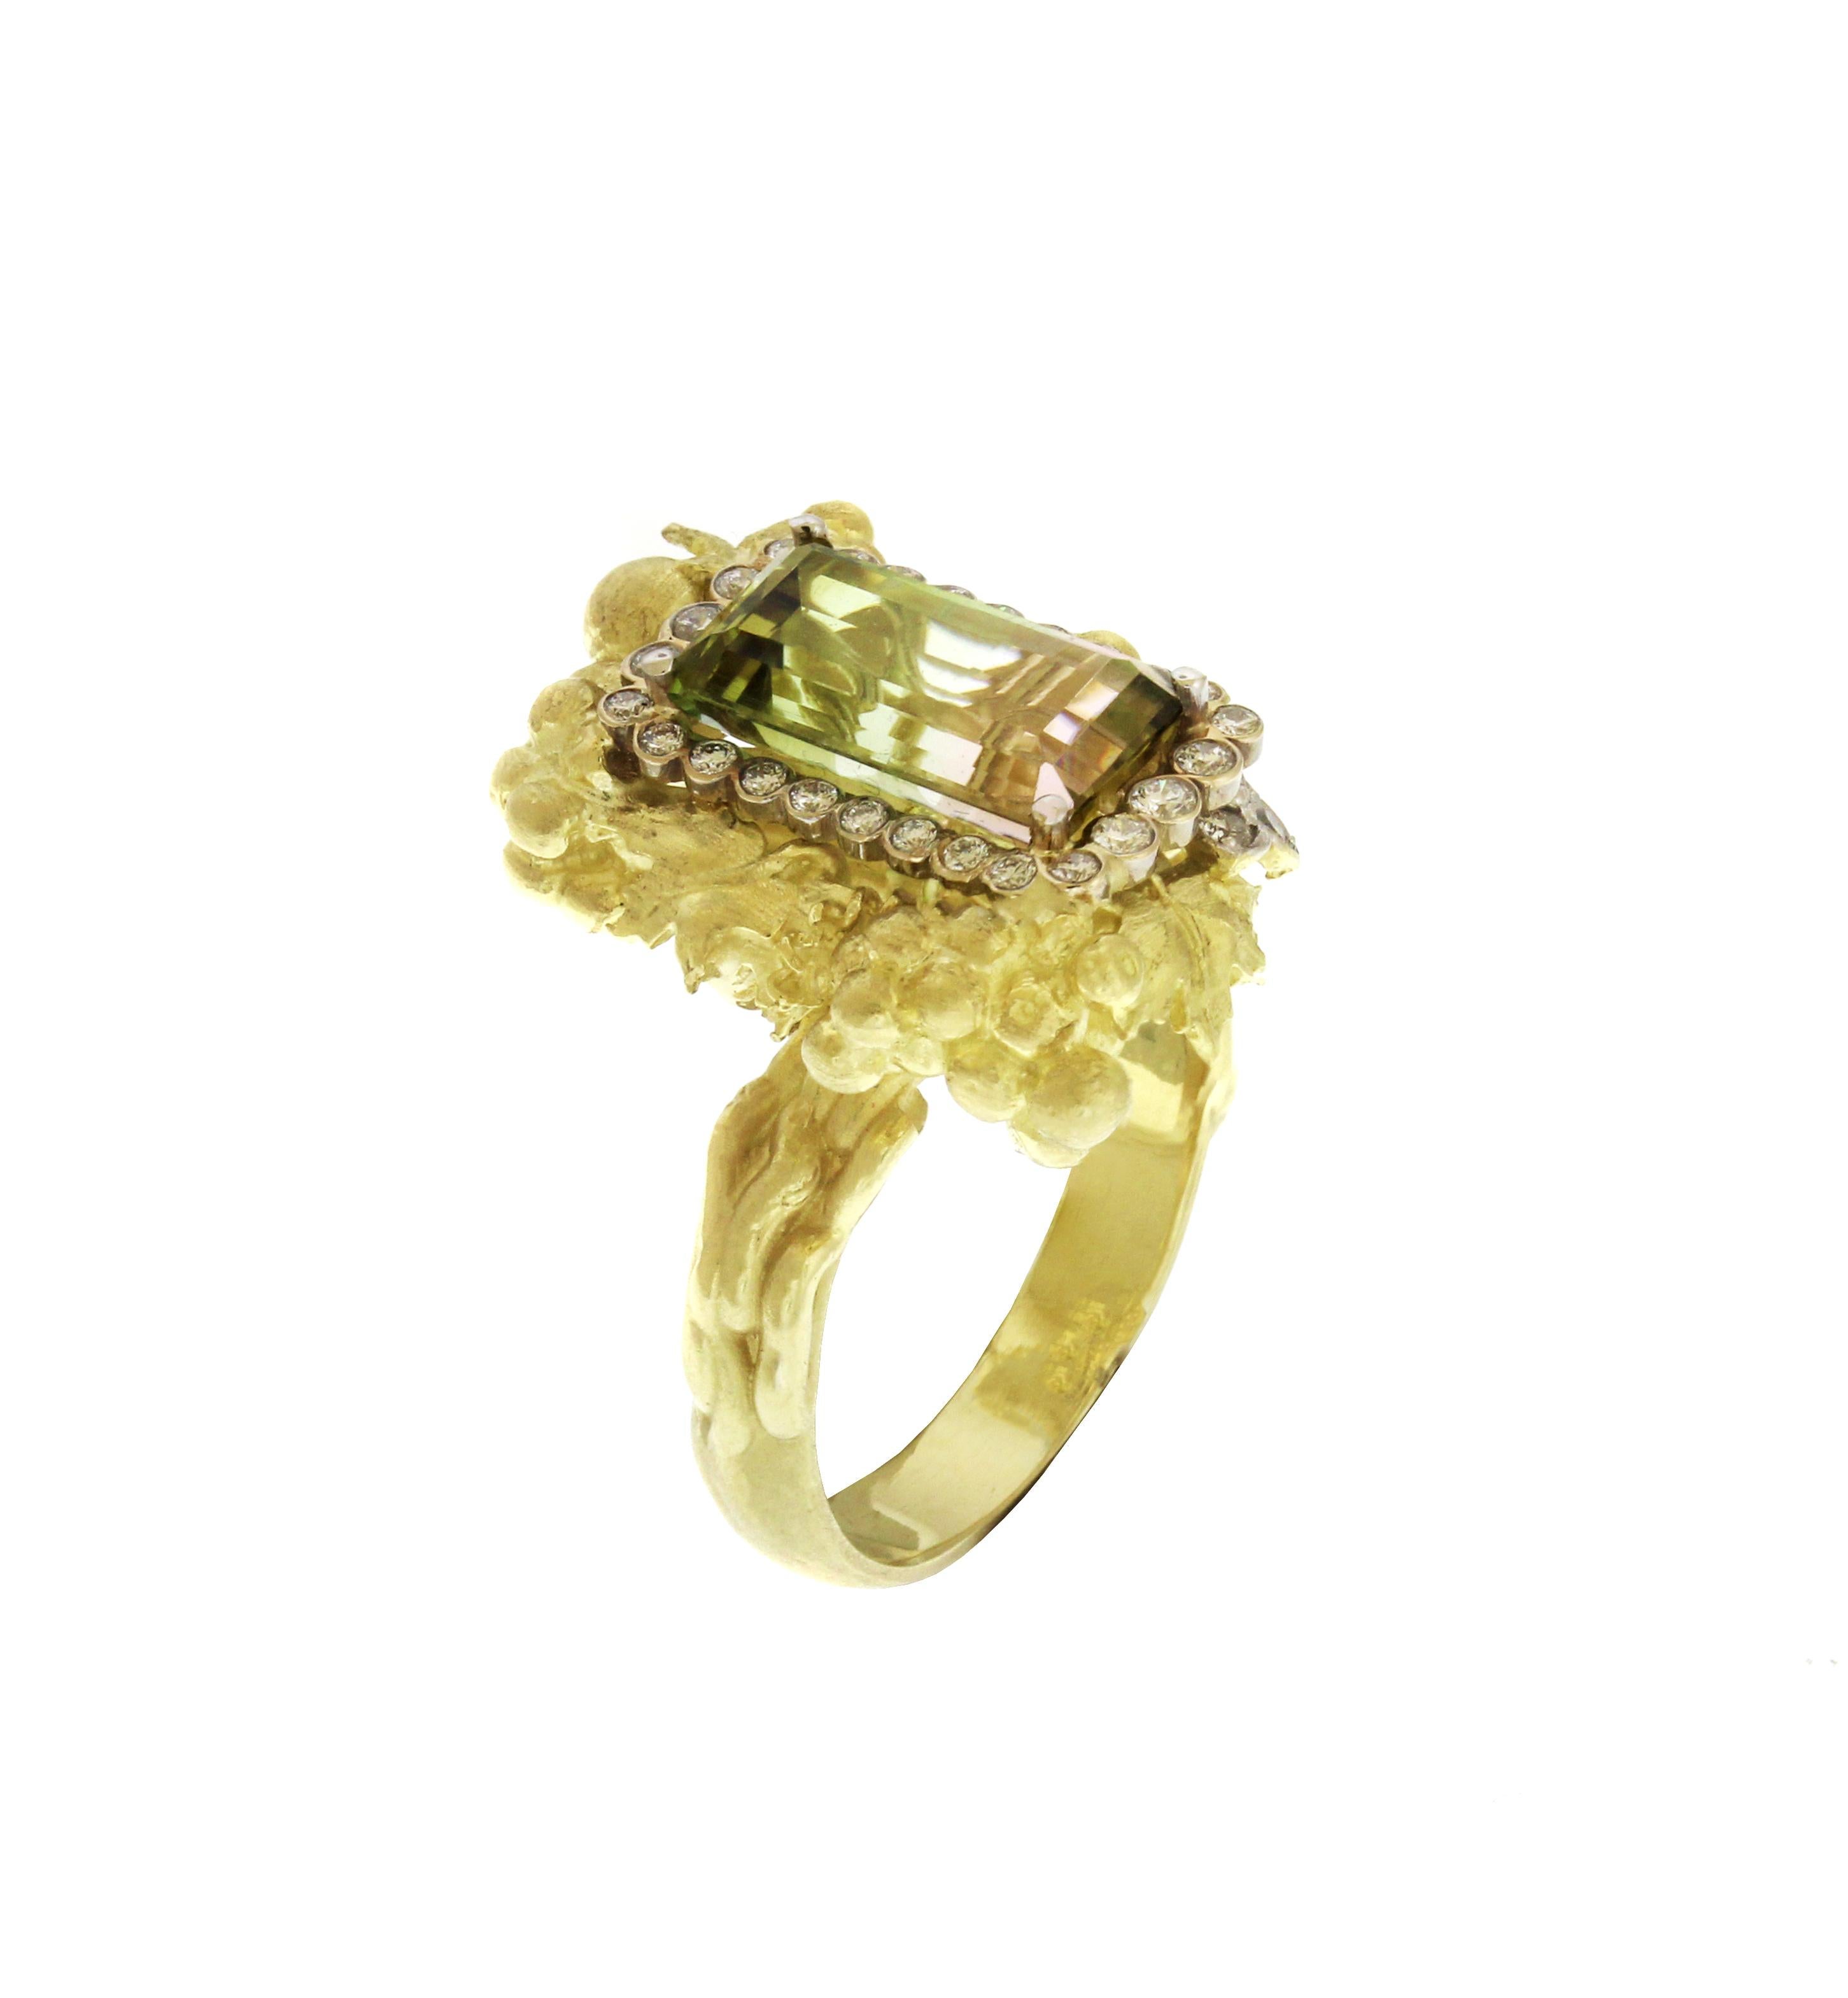 18K Gold Ring with Bicolor Tourmaline Center surrounded by diamonds

Center Bicolor Tourmaline 5.50ct.

0.40ct. G Color, VS Clarity diamonds

Size 6.5. Sizable

Ring face is 1 inch x 0.65 inch., 0.3 inch band width

Signed STAMBOLIAN and has the